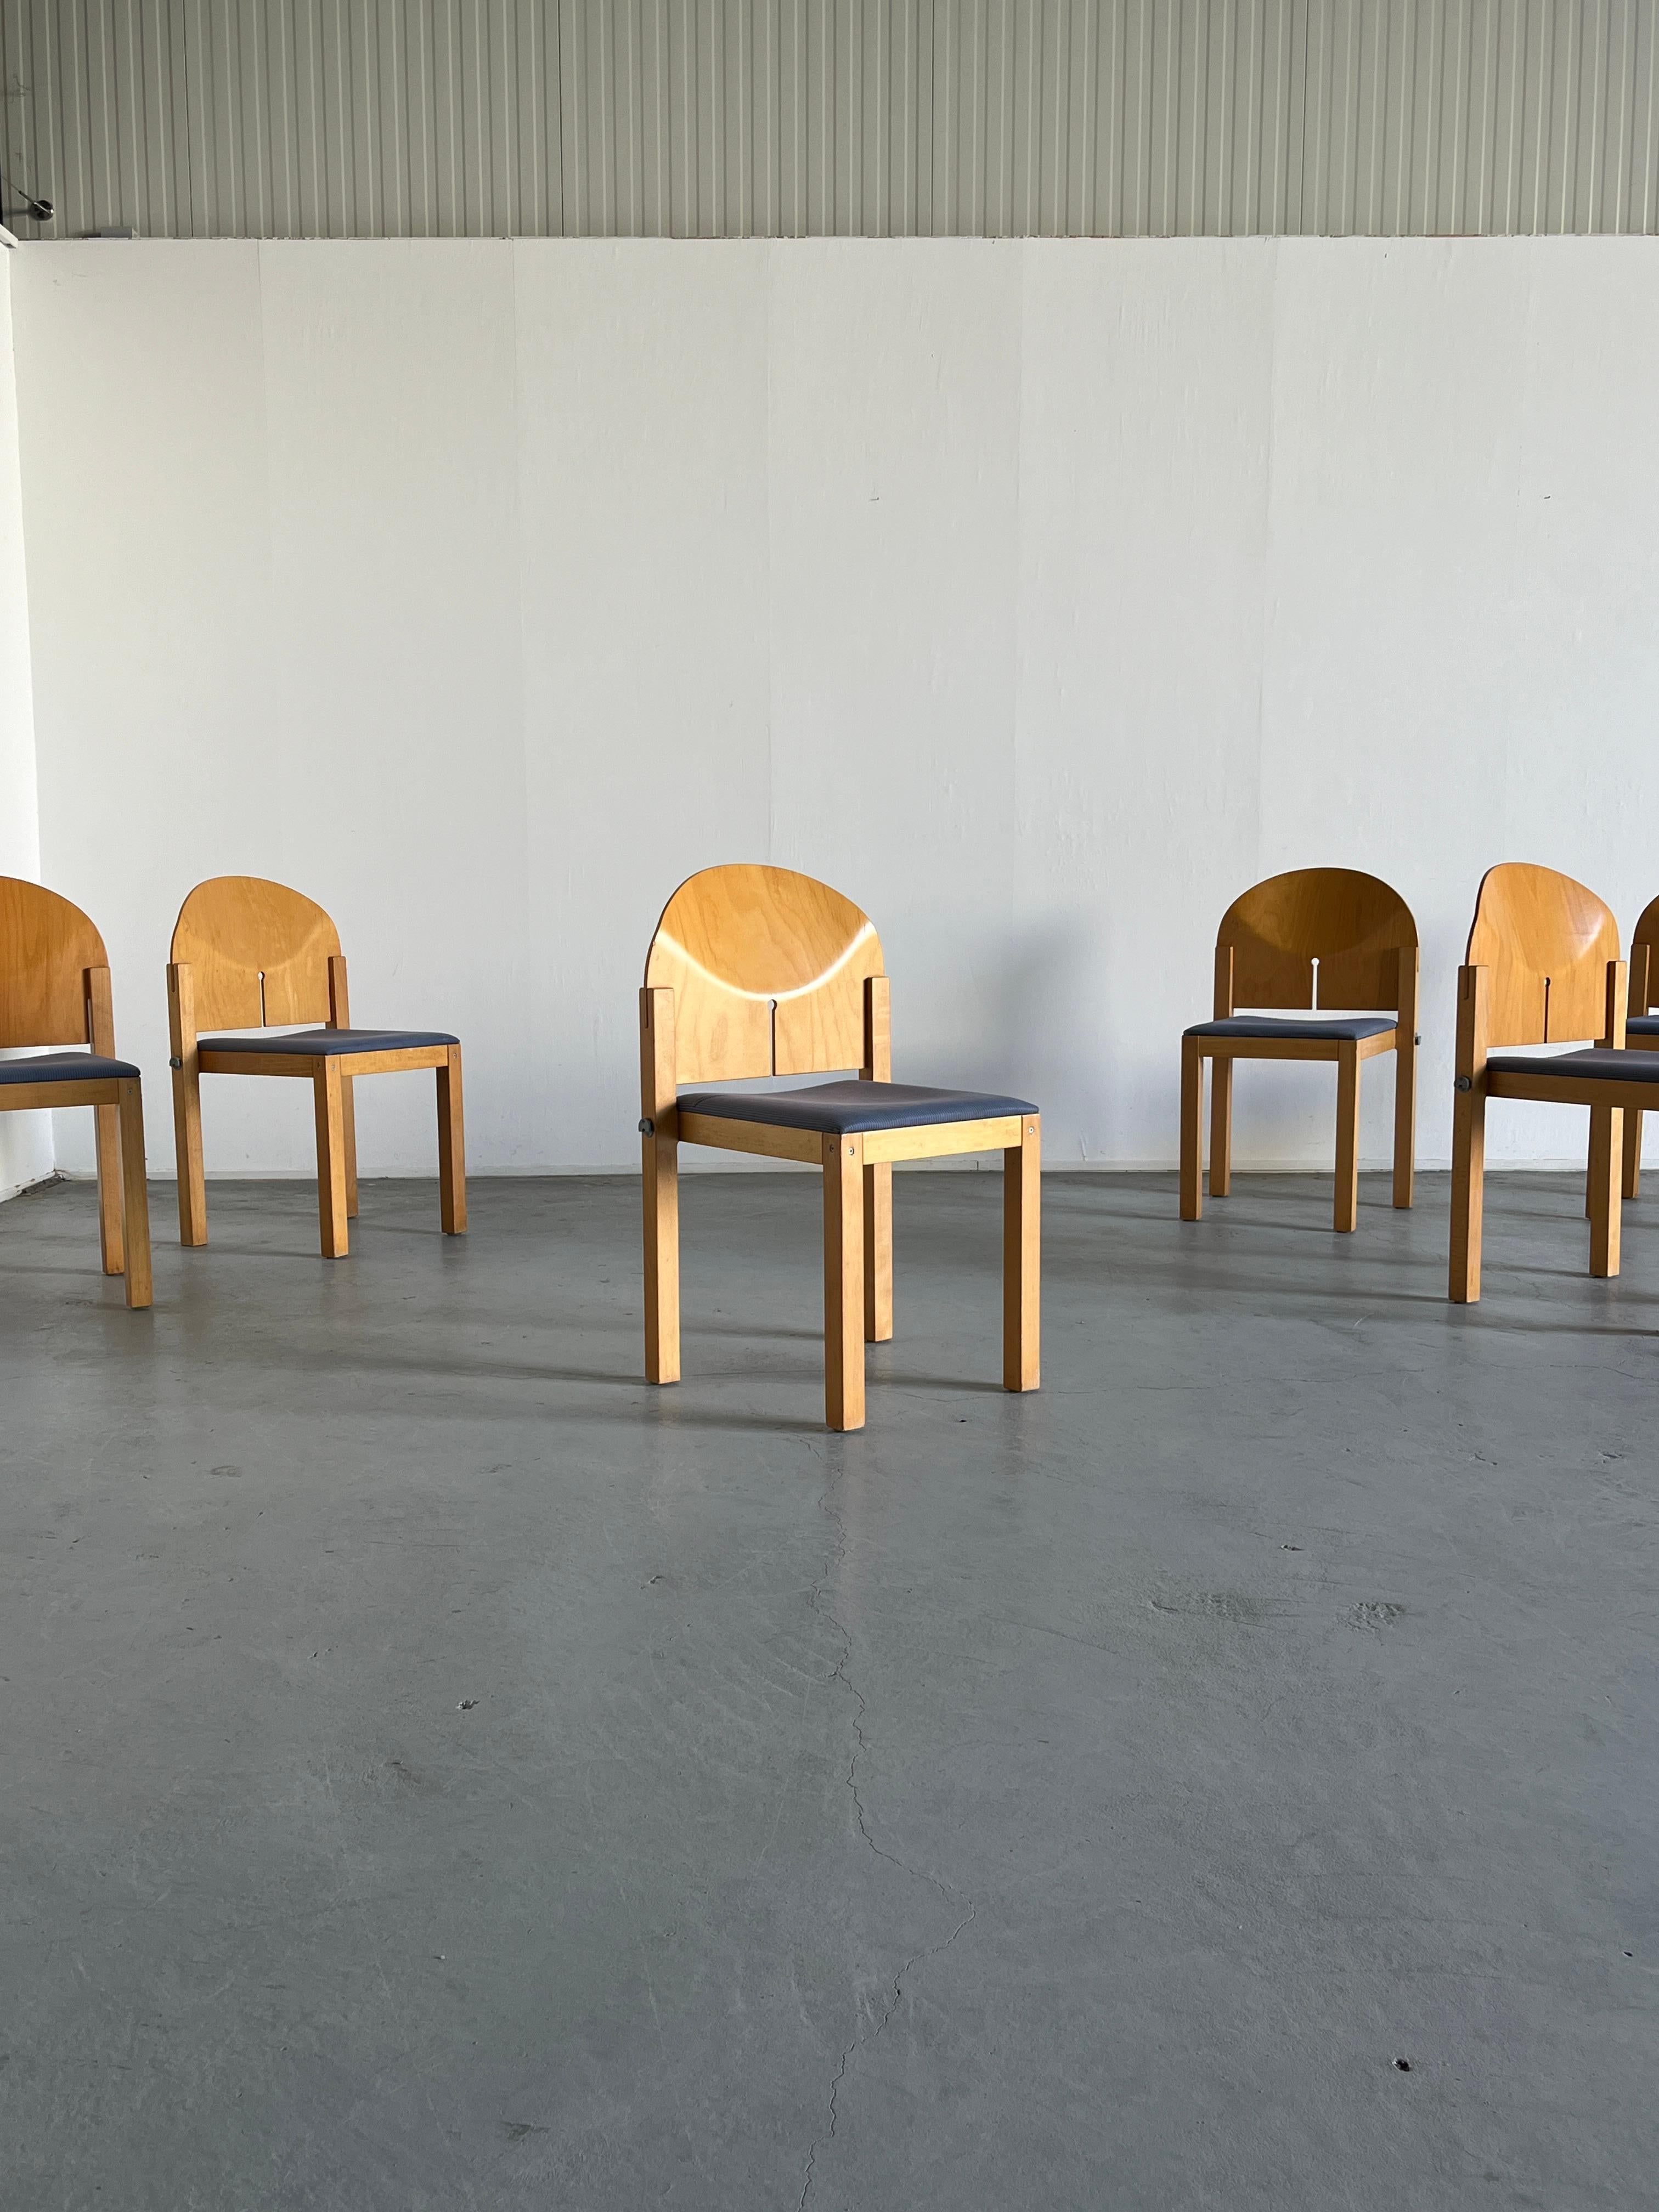 Six beautiful postmodern dining chairs from the 1980s by Arno Votteler for Bisterfeld and Weiss.
High production quality.
Reminiscent of the designs of Afra and Tobia Scarpa for B&B Italia in the 1970s.
Can be connected to form a seating bench.

6